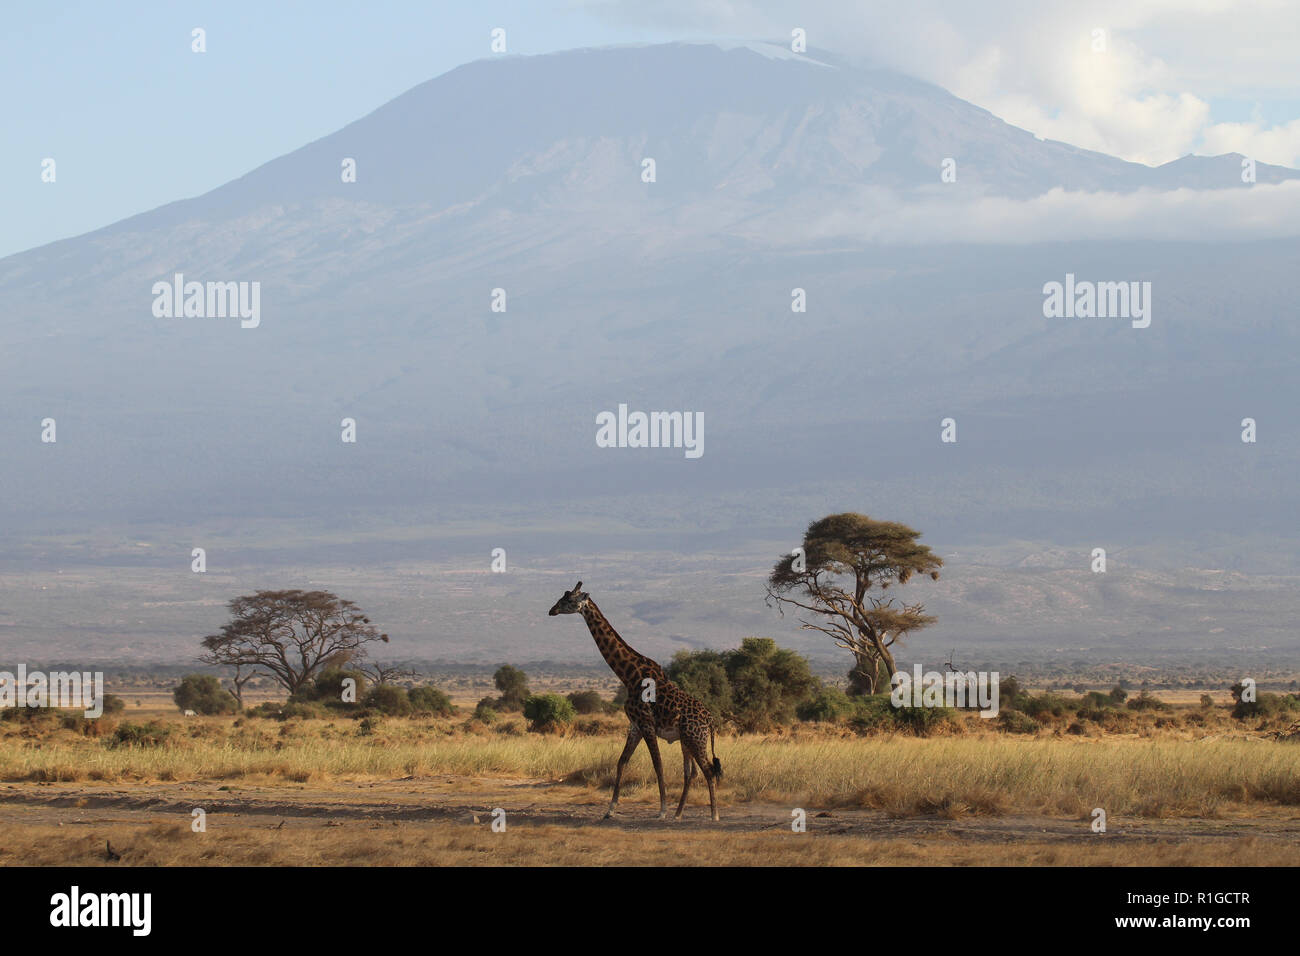 A giraffe walking in front of the Mt. Kilimanjaro Stock Photo